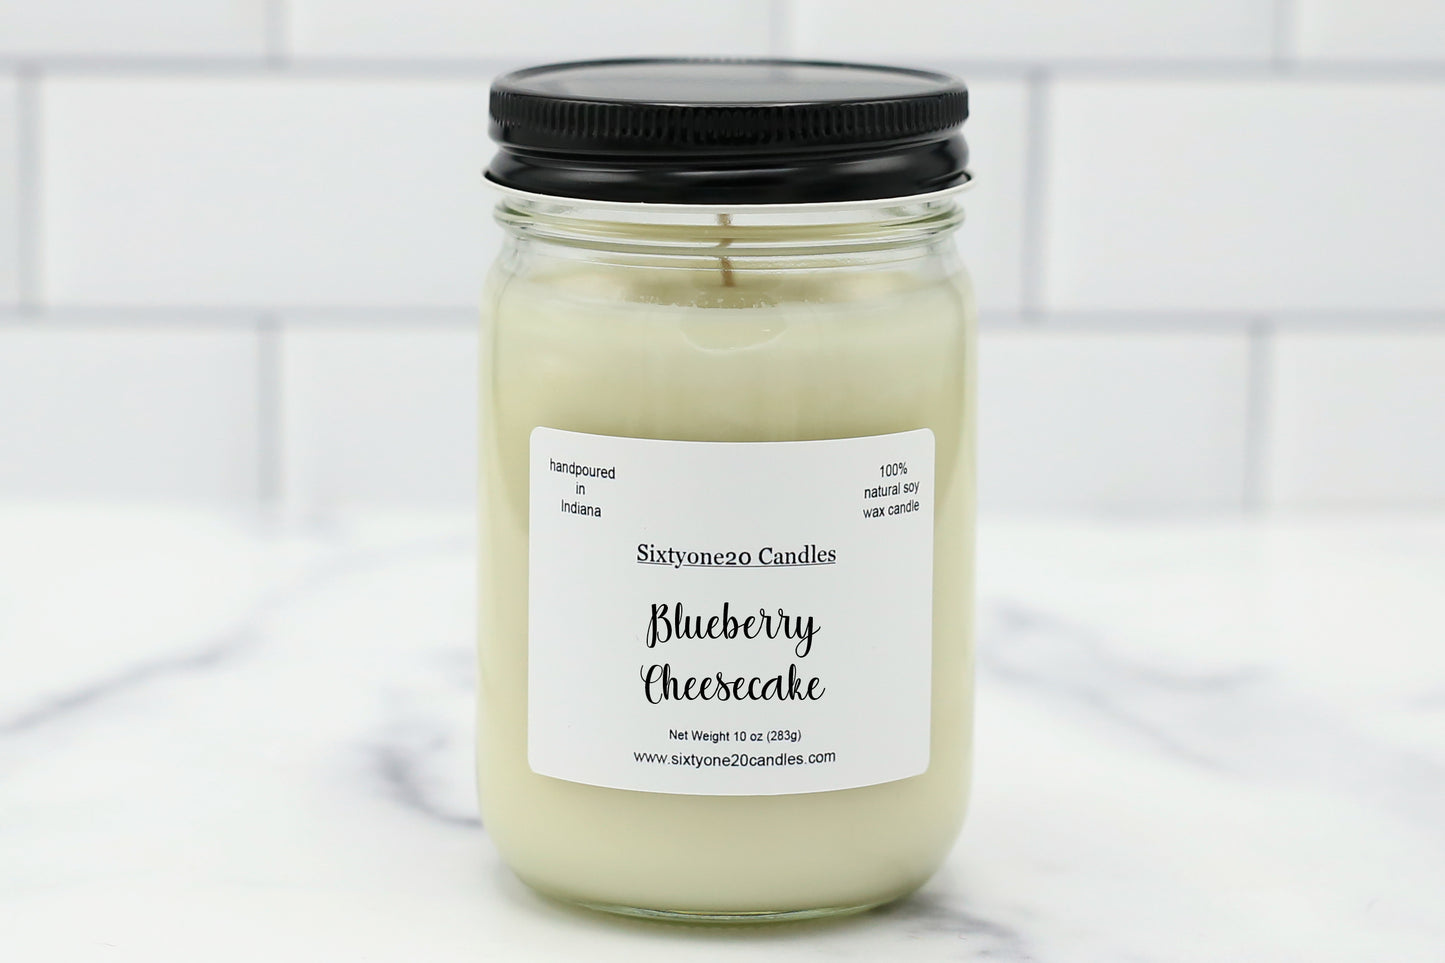 Blueberry Cheesecake 10 oz net weight soy wax candle